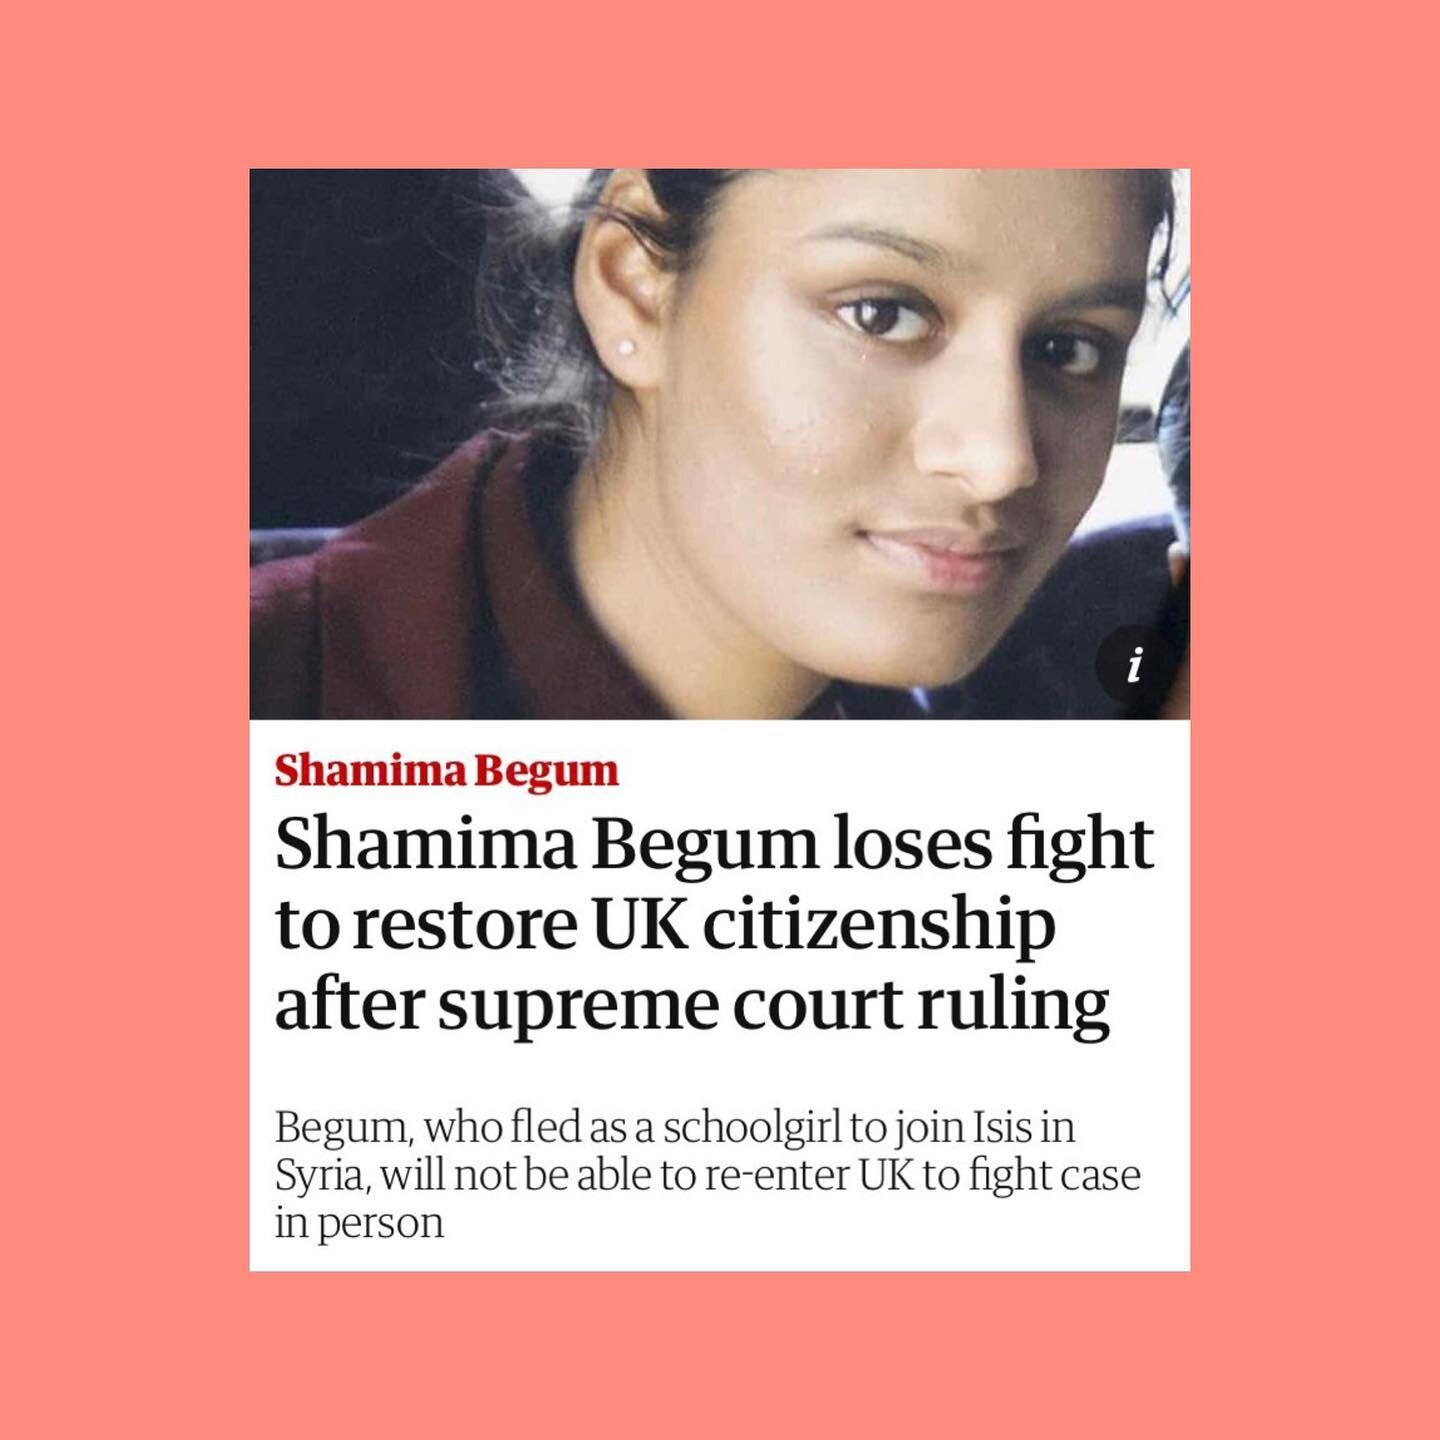 🗣 Some thoughts from Twitter on this week&rsquo;s Supreme Court ruling against Shamima Begum&rsquo;s appeal against the government&rsquo;s decision to remove her U.K. citizenship. 

#shamimabegum #britishcitizenship #supremecourtruling